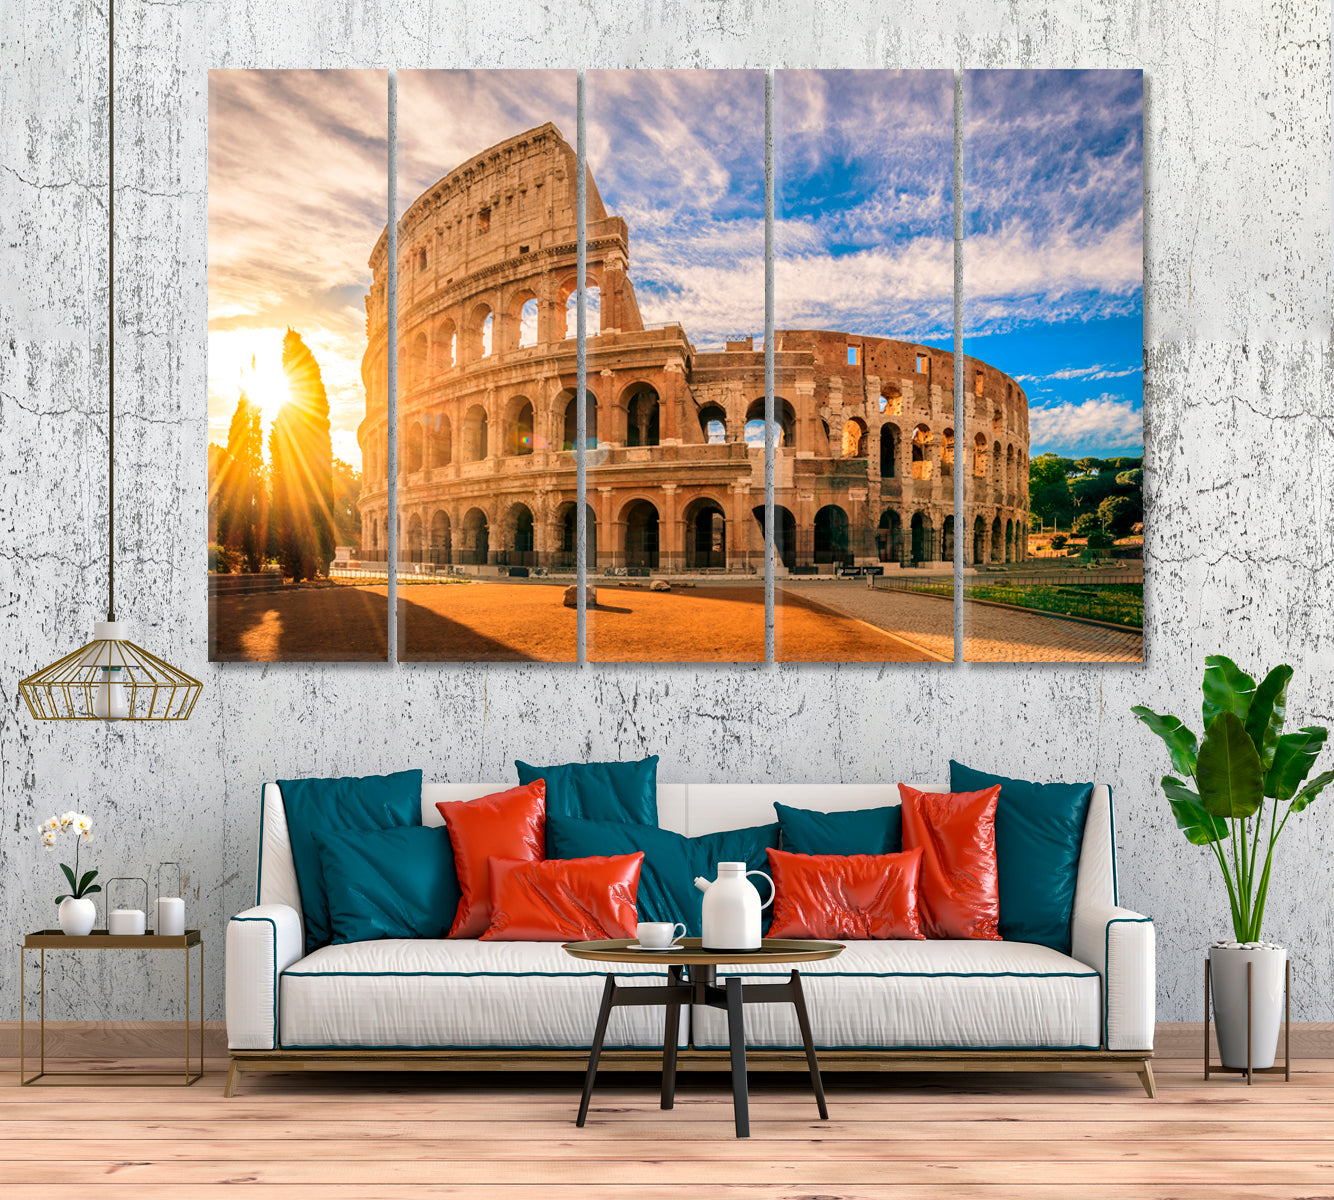 Colosseum at Sunrise Rome Italy Canvas Print ArtLexy 5 Panels 36"x24" inches 